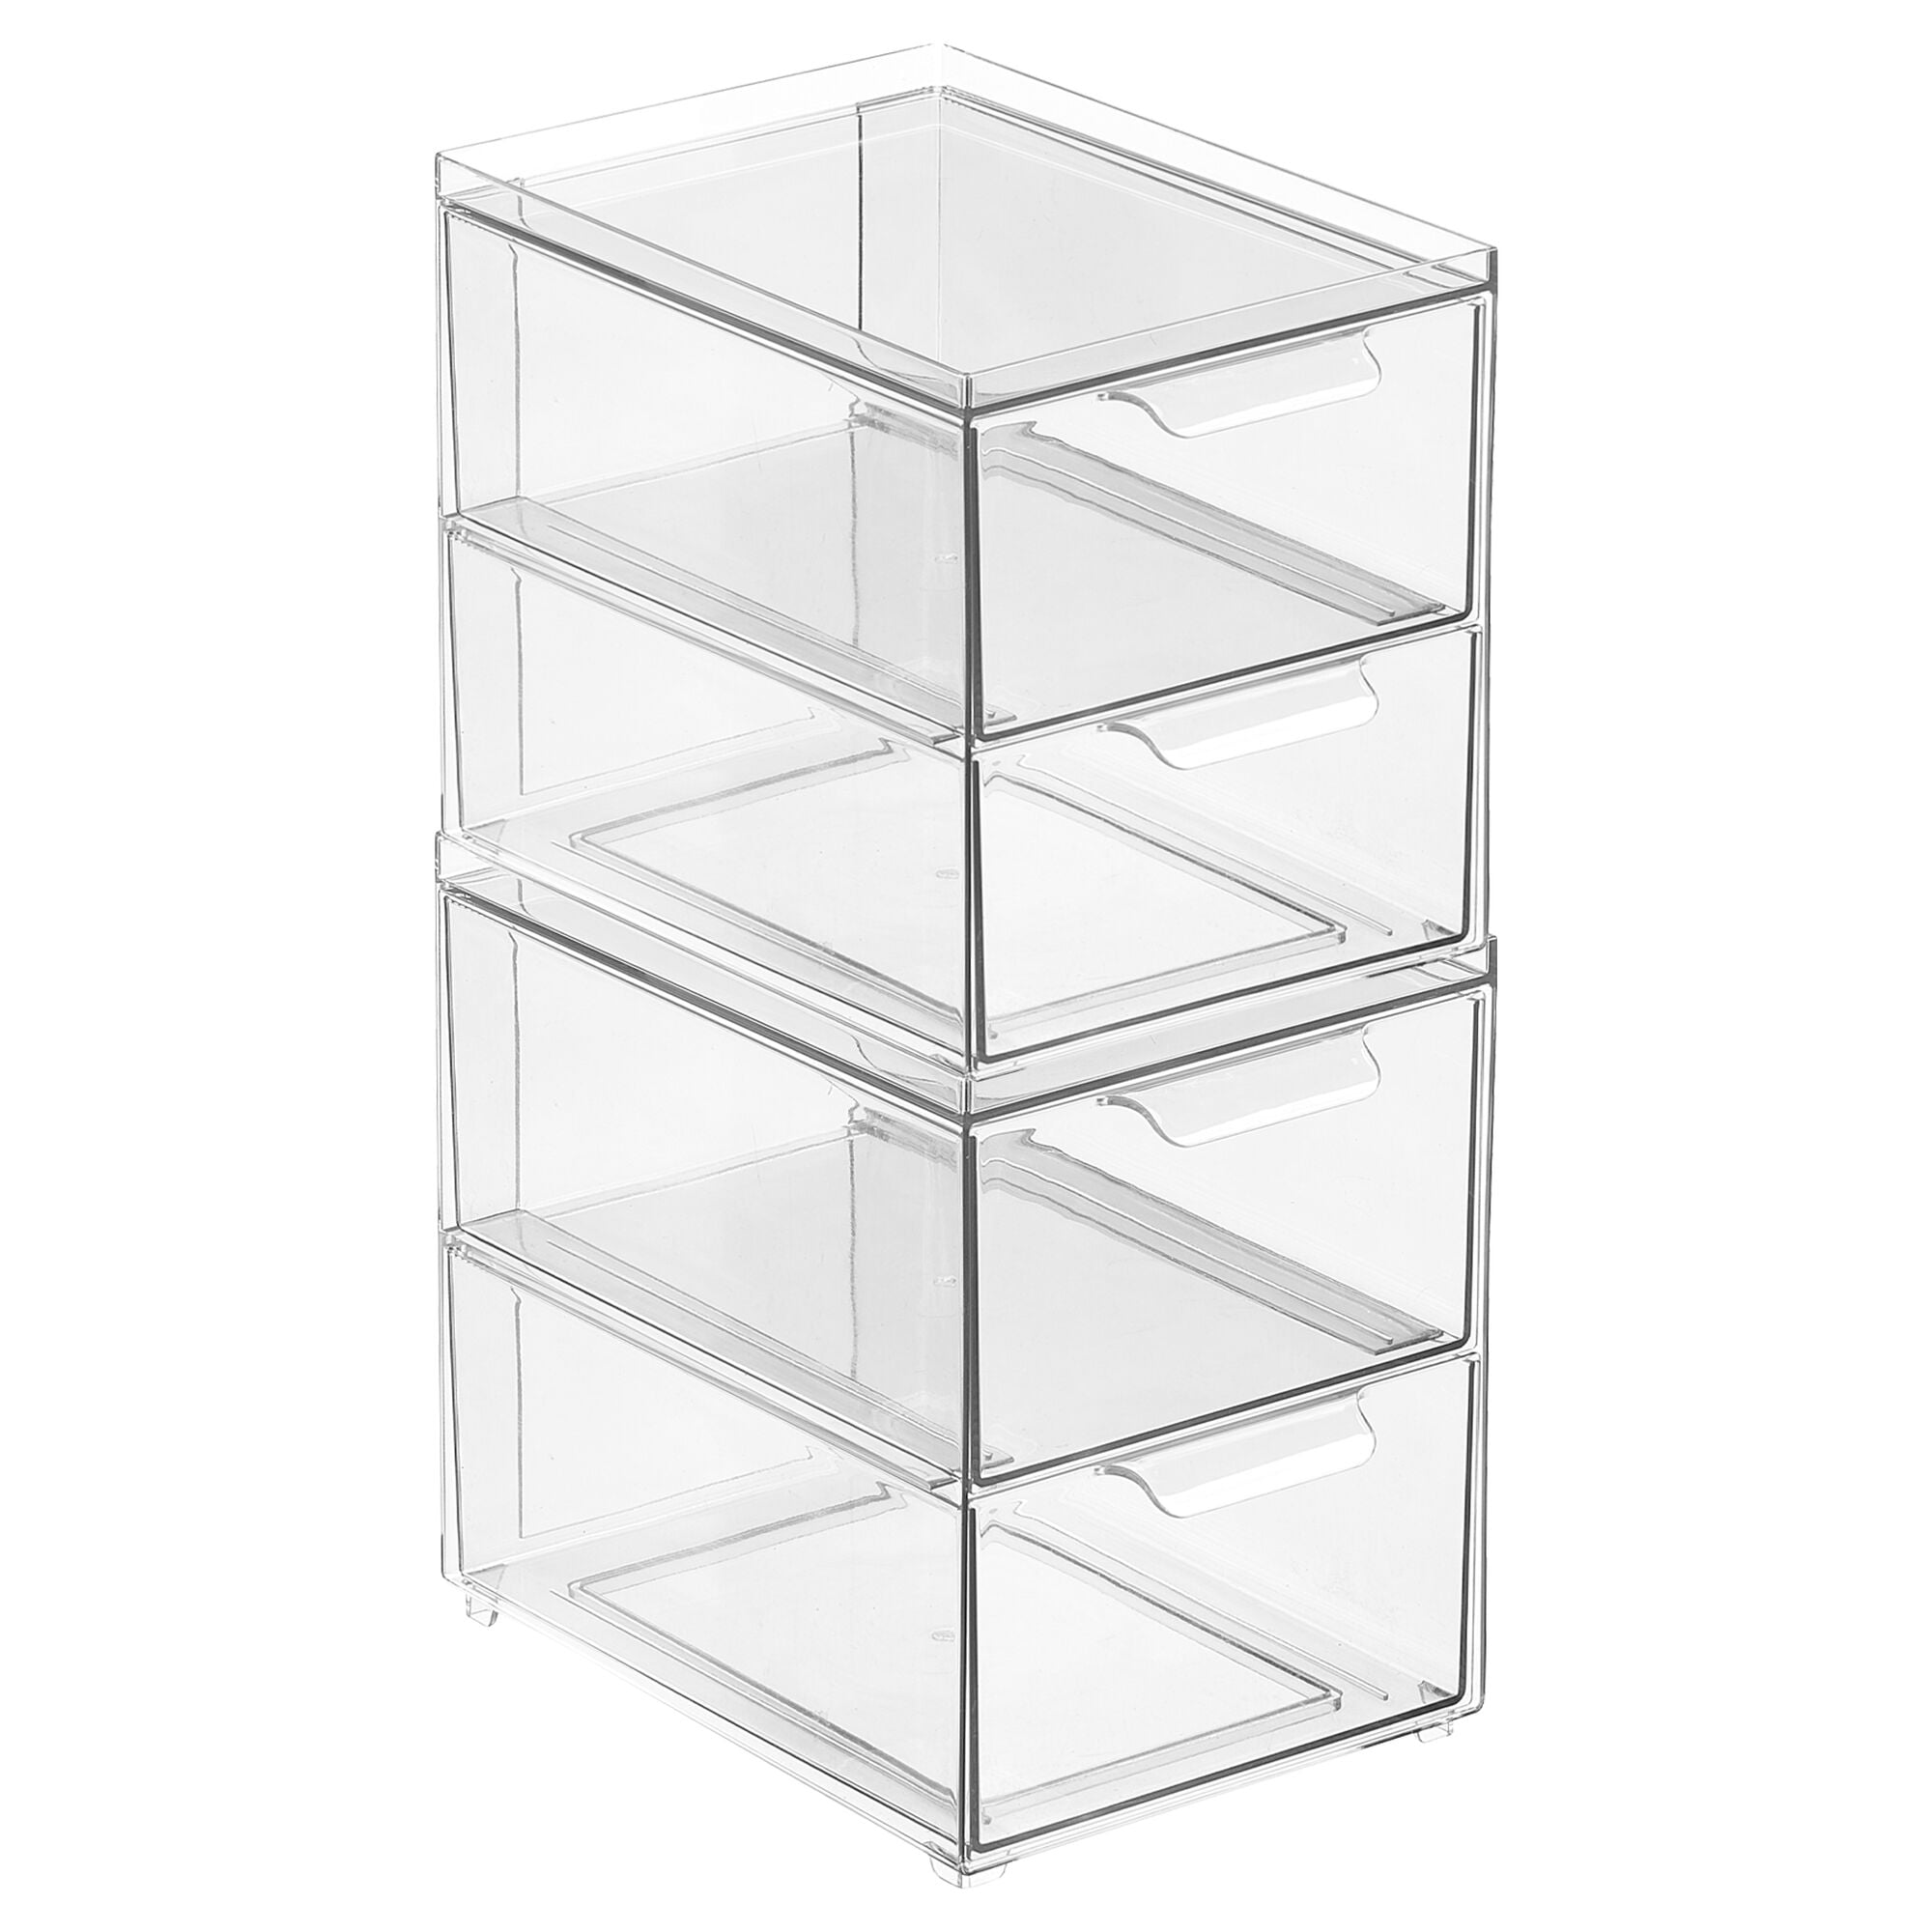 Mdesign Clarity Plastic Stackable Bathroom Storage Organizer With Drawer,  Clear - 12 X 16 X 6, 2 Pack : Target